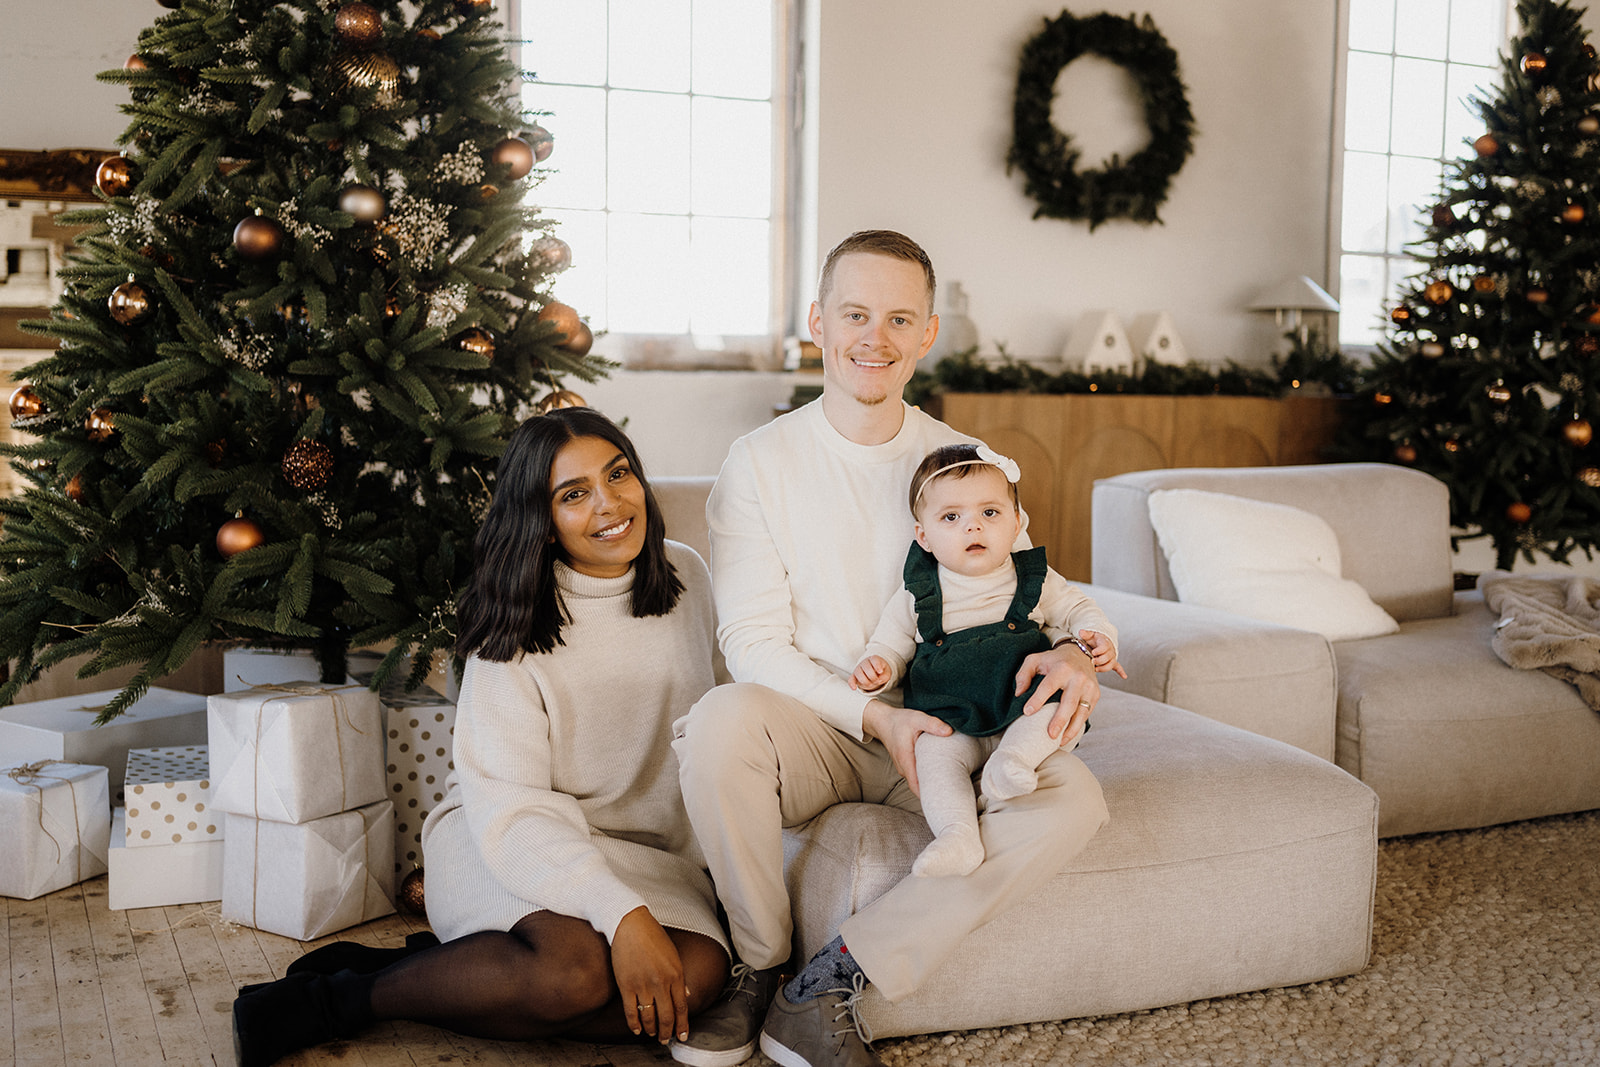 A family of three sitting inside in front of a Christmas Tree.